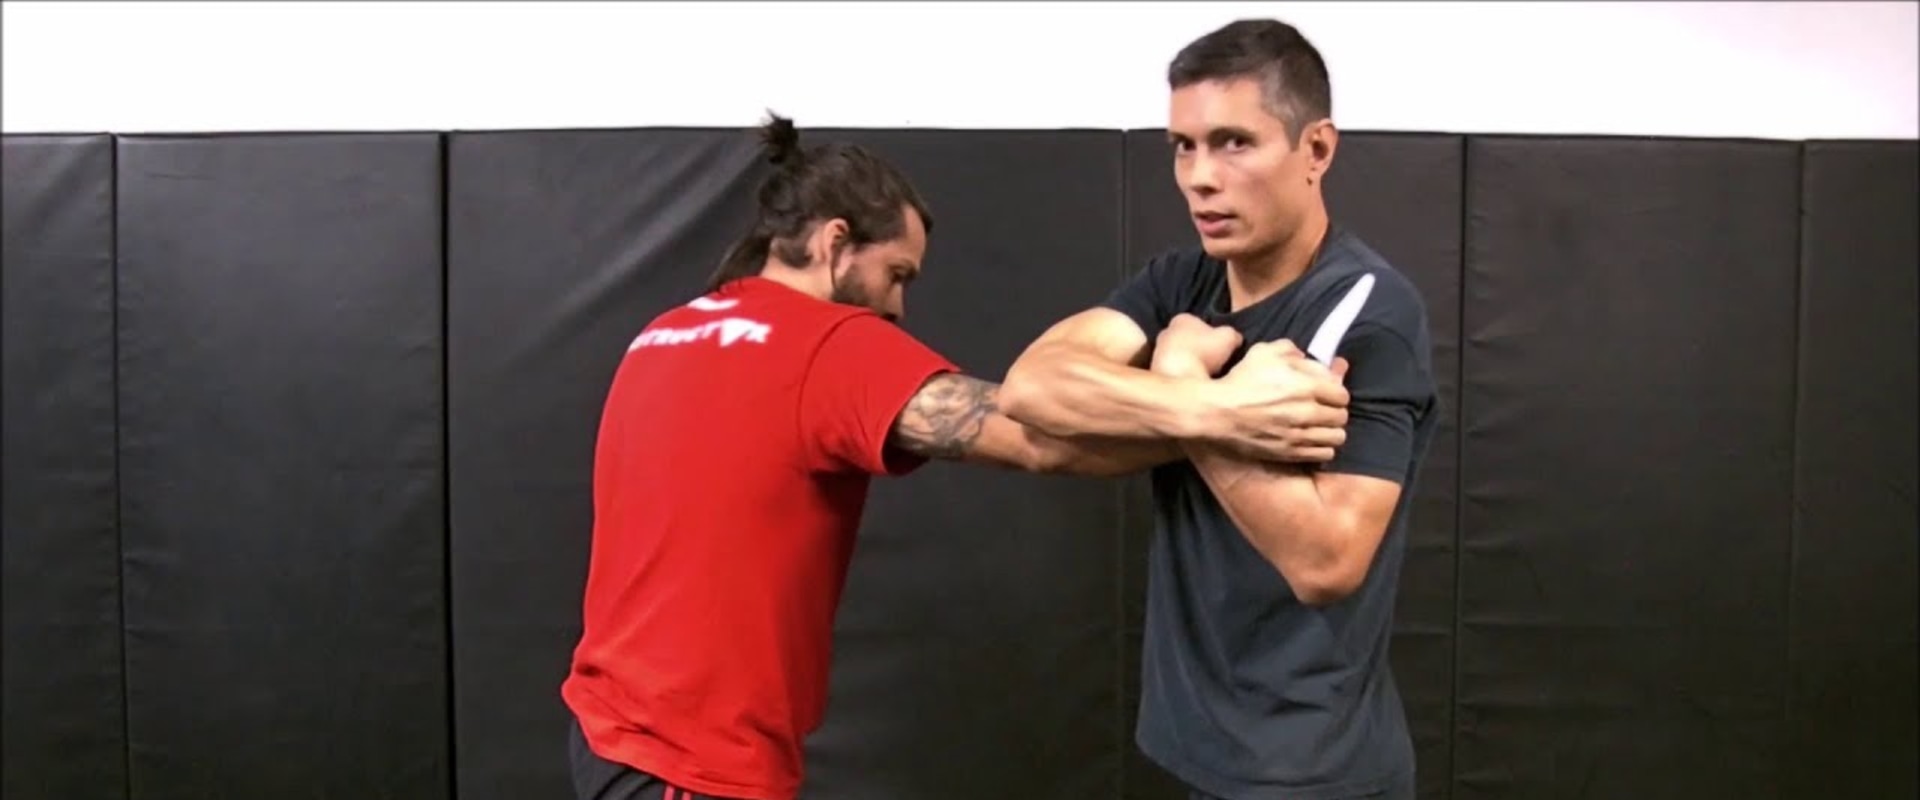 Defending Against Weapons: An In-Depth Look at Krav Maga Advanced Techniques